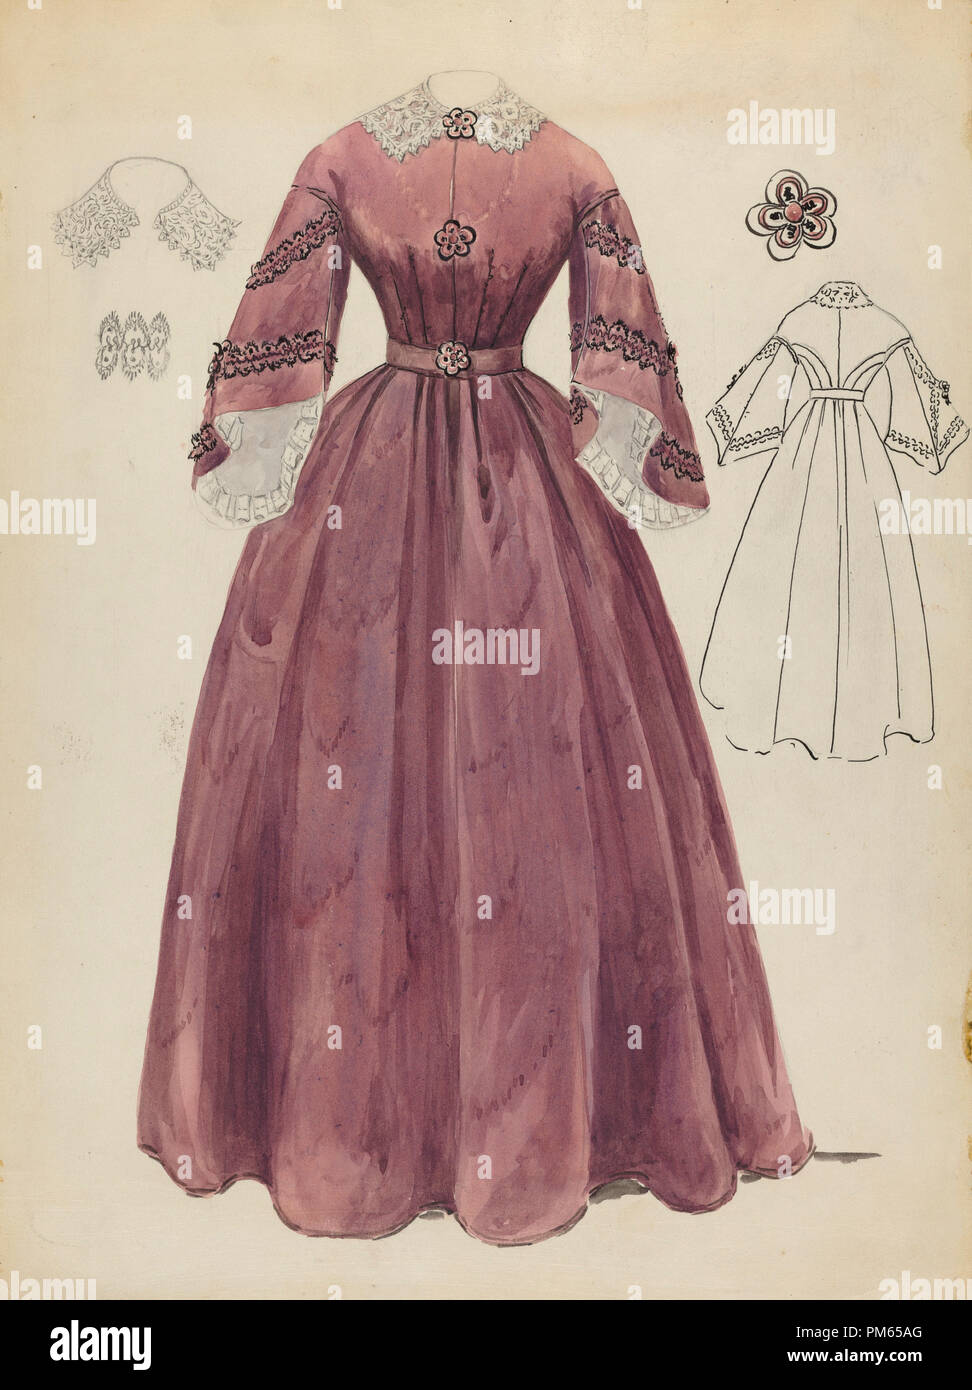 Dress. Dated: 1935/1942. Dimensions: overall: 30.4 x 22.7 cm (11 15/16 x 8 15/16 in.). Medium: watercolor, graphite, and pen and ink on paper. Museum: National Gallery of Art, Washington DC. Author: Jessie M. Benge. Stock Photo